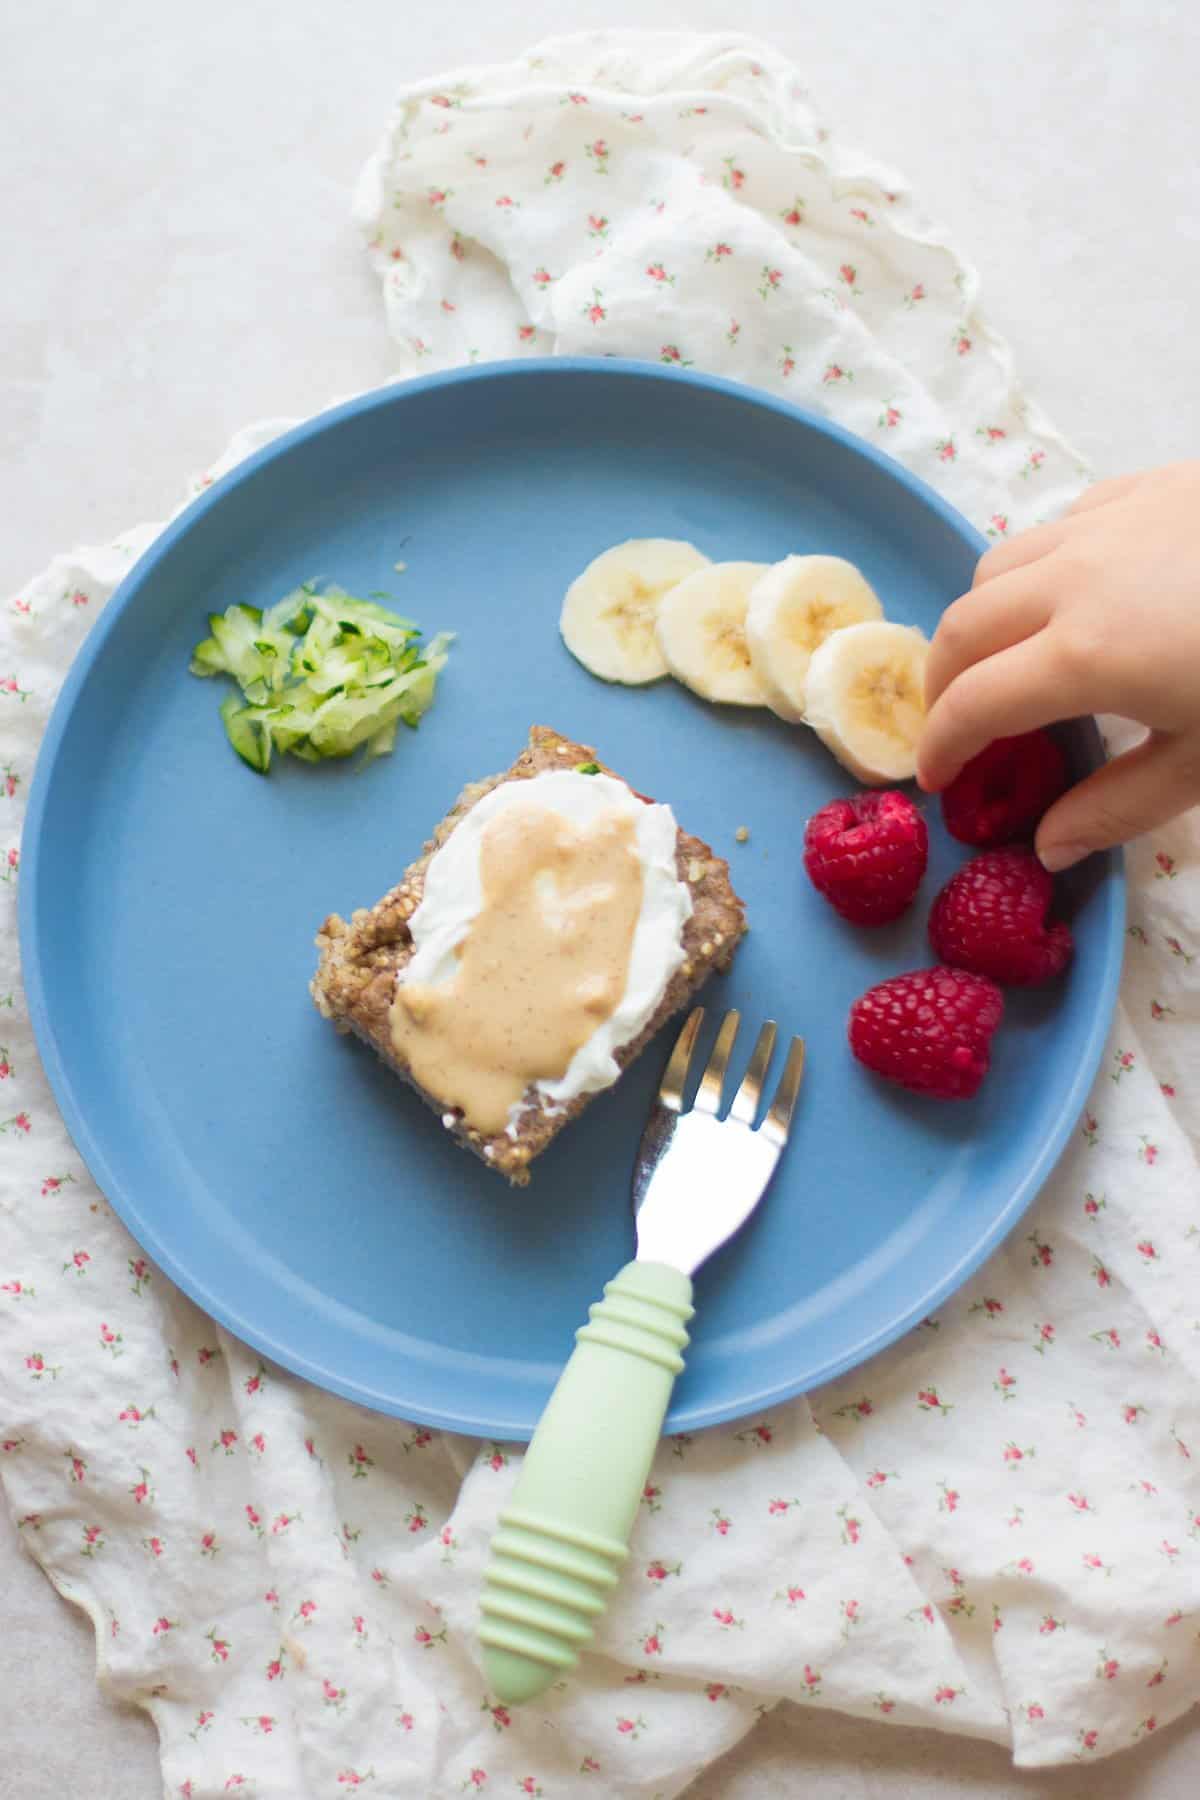 A slice of quinoa bake with yogurt and peanut butter with banana slices, raspberries, and grated zucchini on the side.